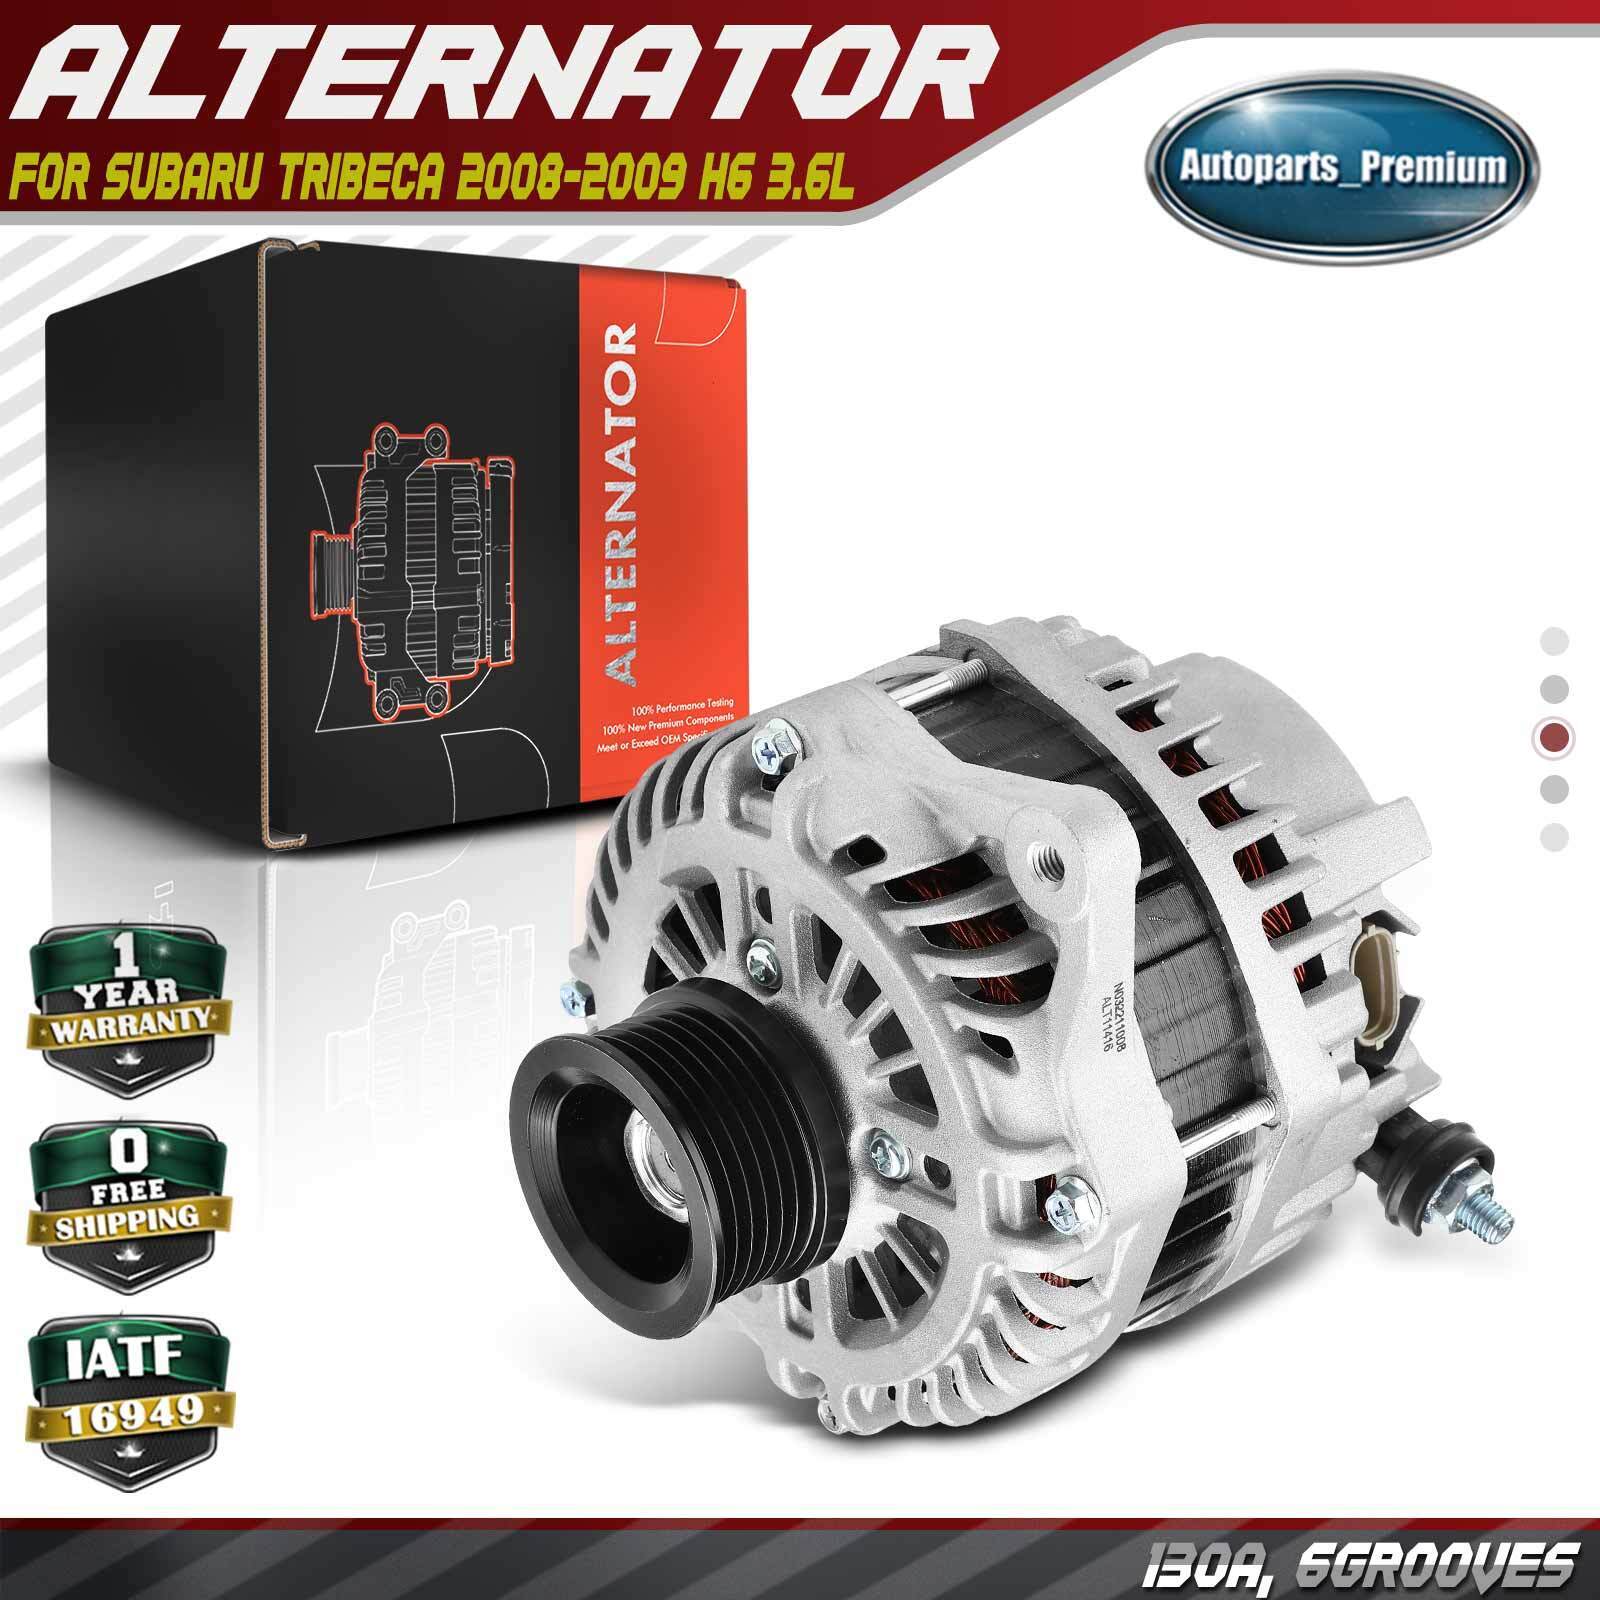 New Alternator for Subaru Tribeca 2008 2009 H6 3.6L 130A 12V CW 6-Groove Pulley